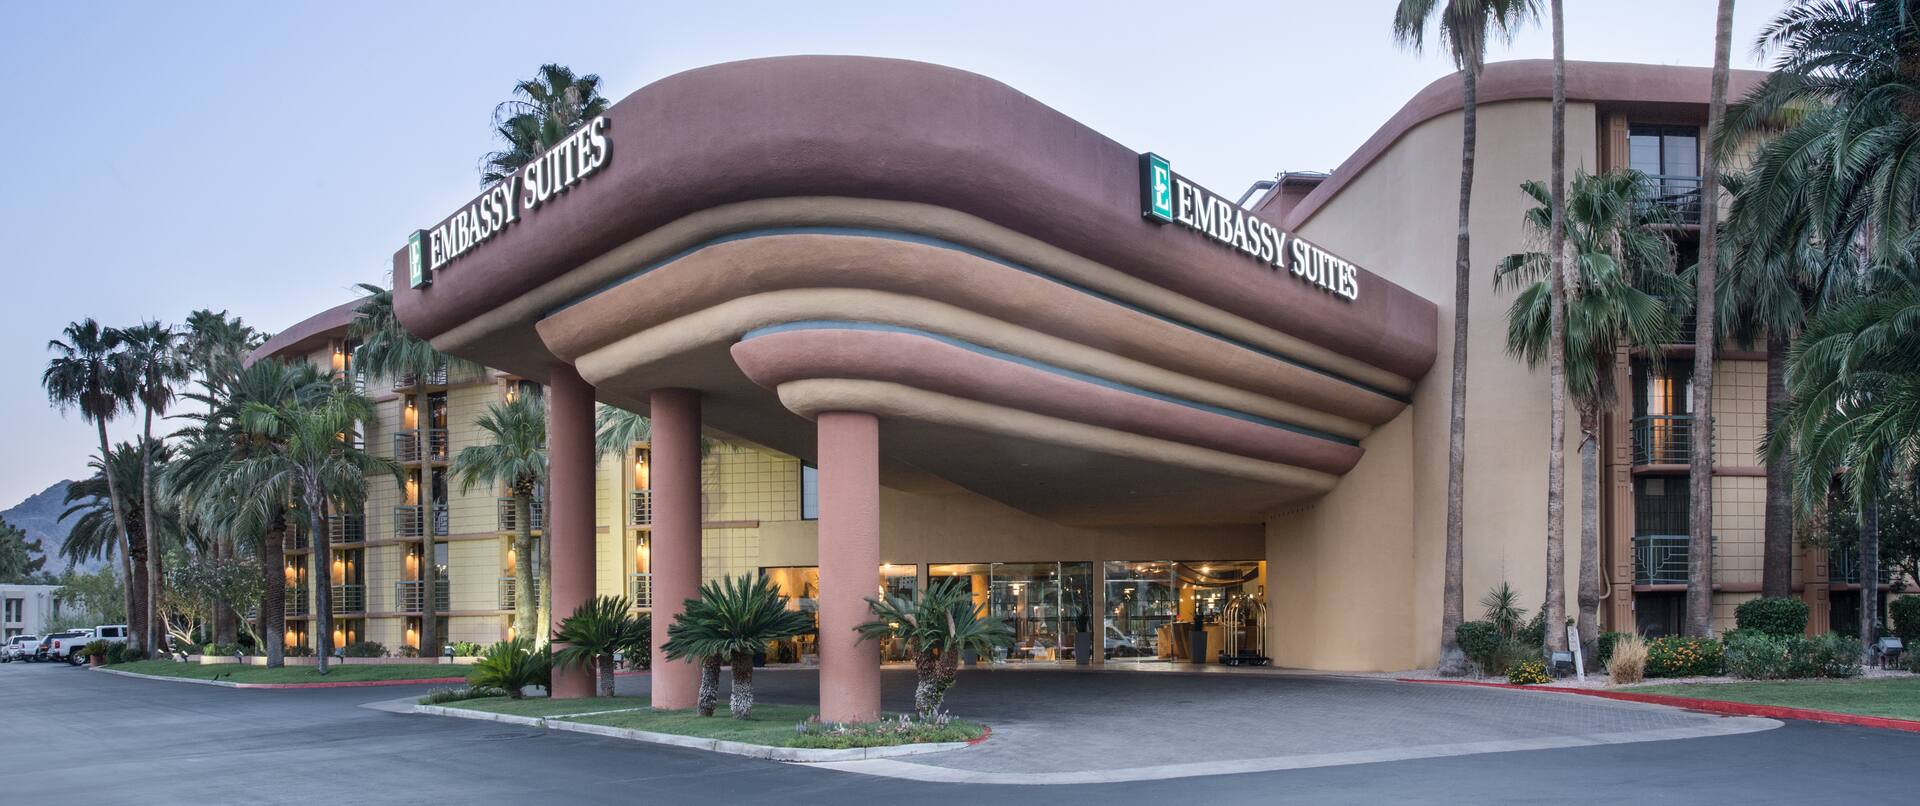 View of Hotel Exterior, Signage and Circle Drive Surrounded by Palm Trees at Dusk